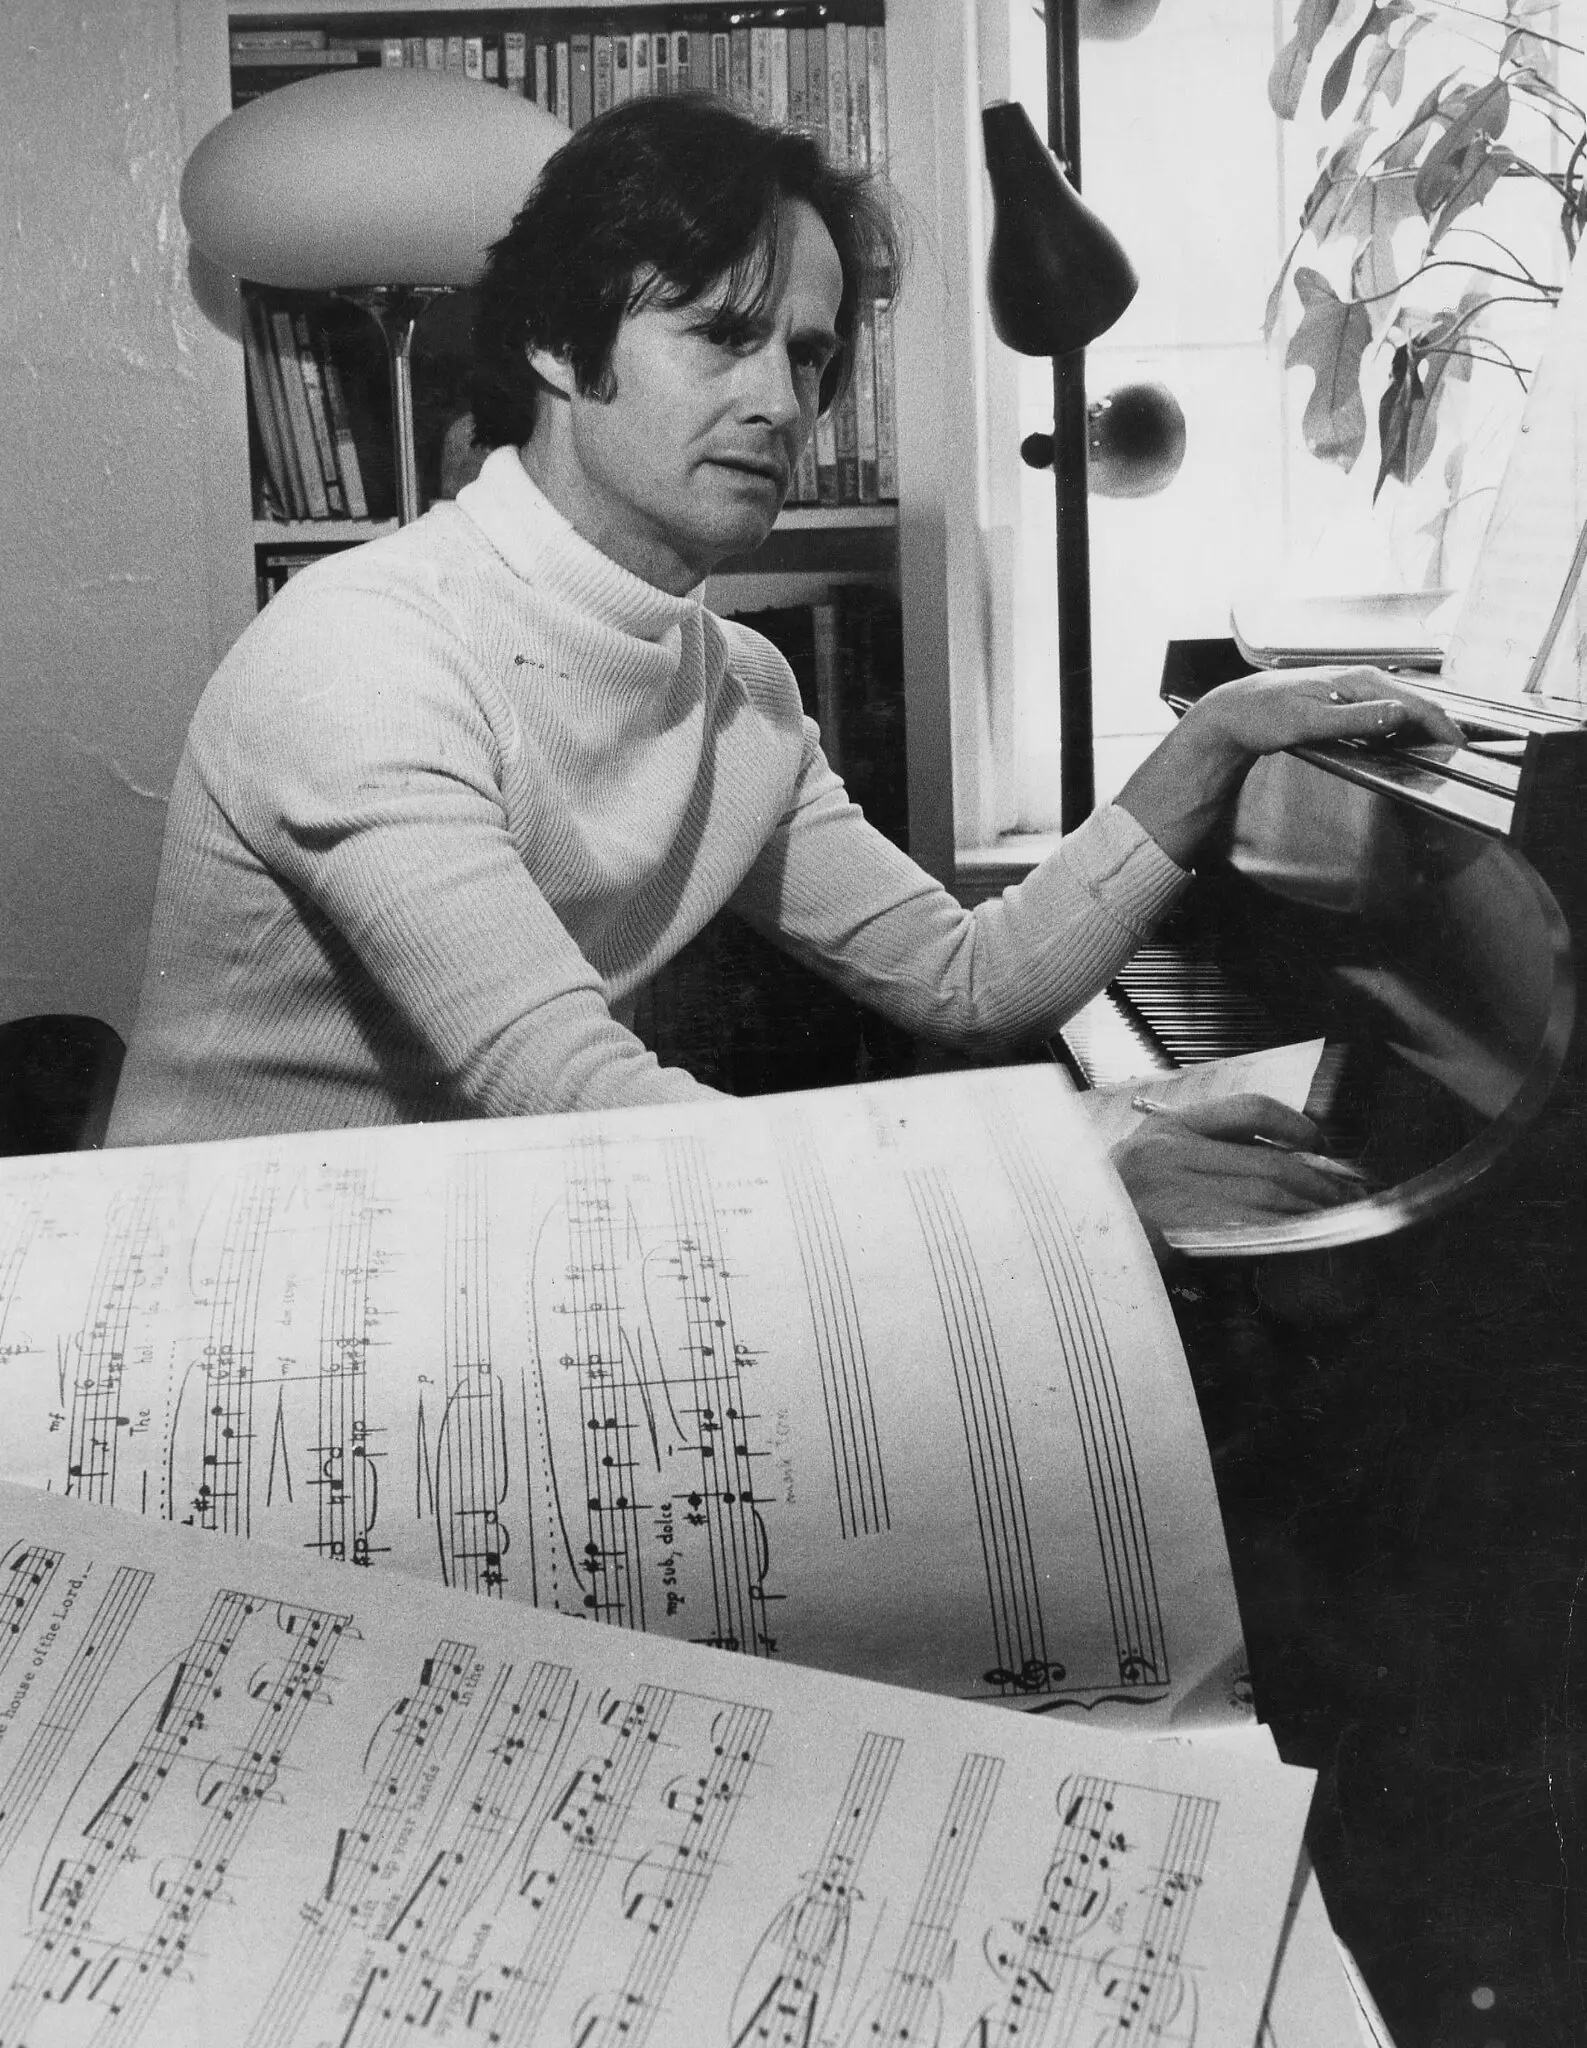 Ned Rorem sitting at the piano with scores in the foreground.